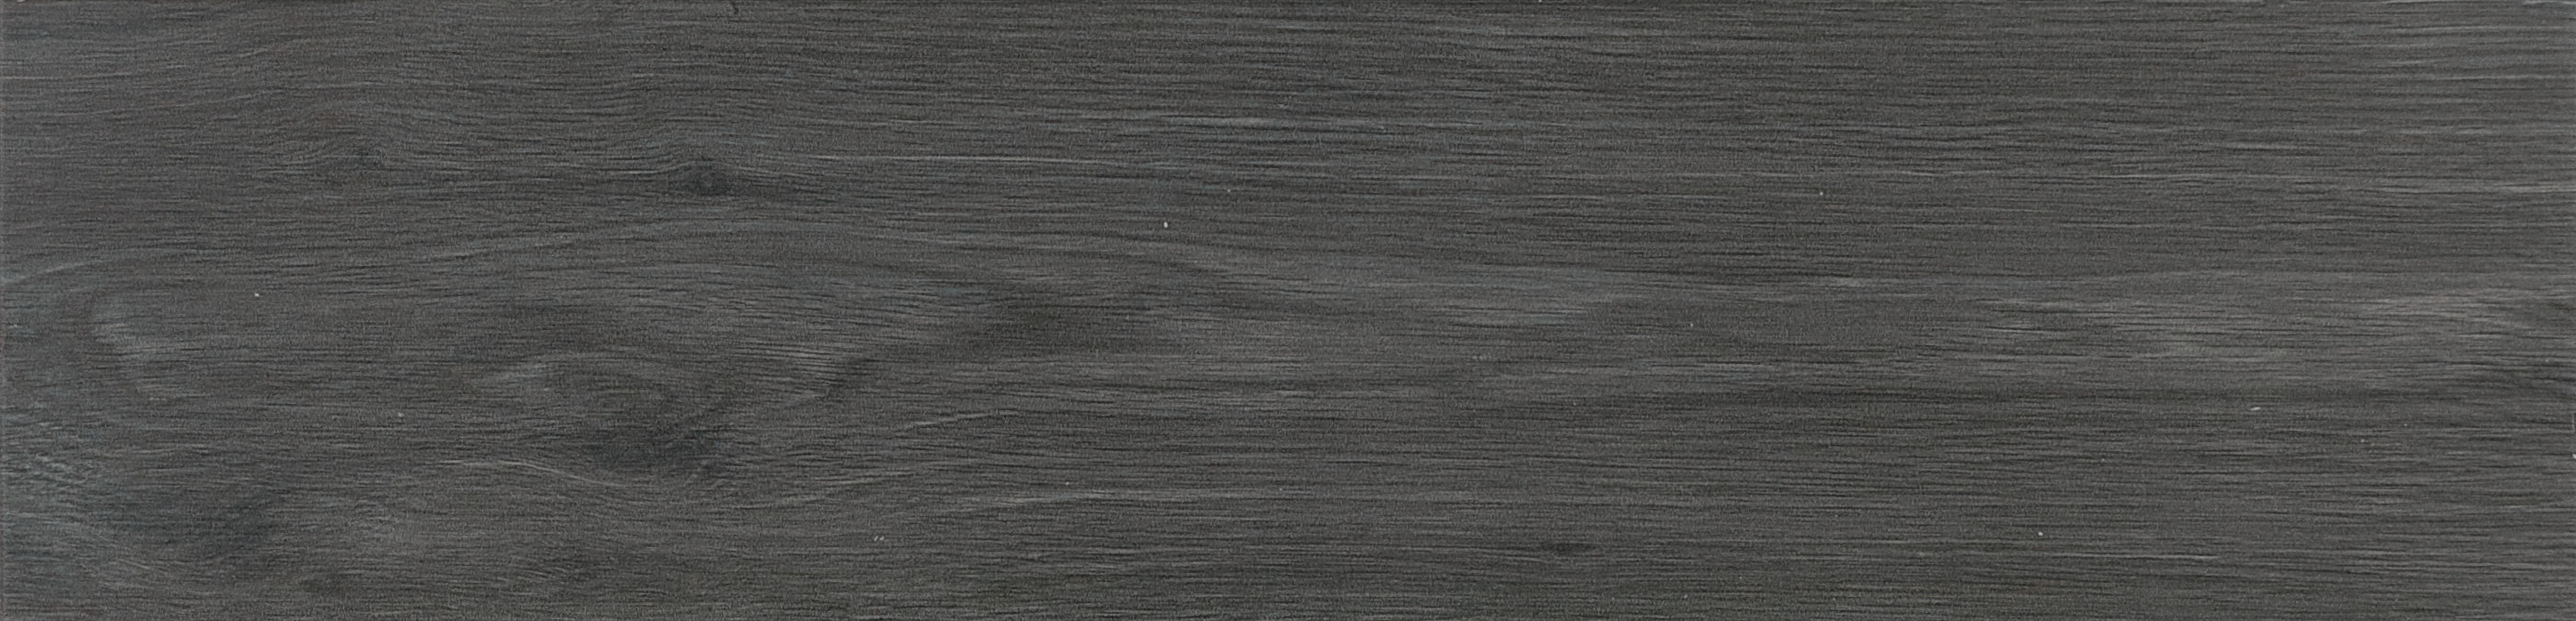 carbon pattern glazed porcelain field tile from vintagewood anatolia collection distributed by surface group international matte finish pressed edge 6x24 rectangle shape